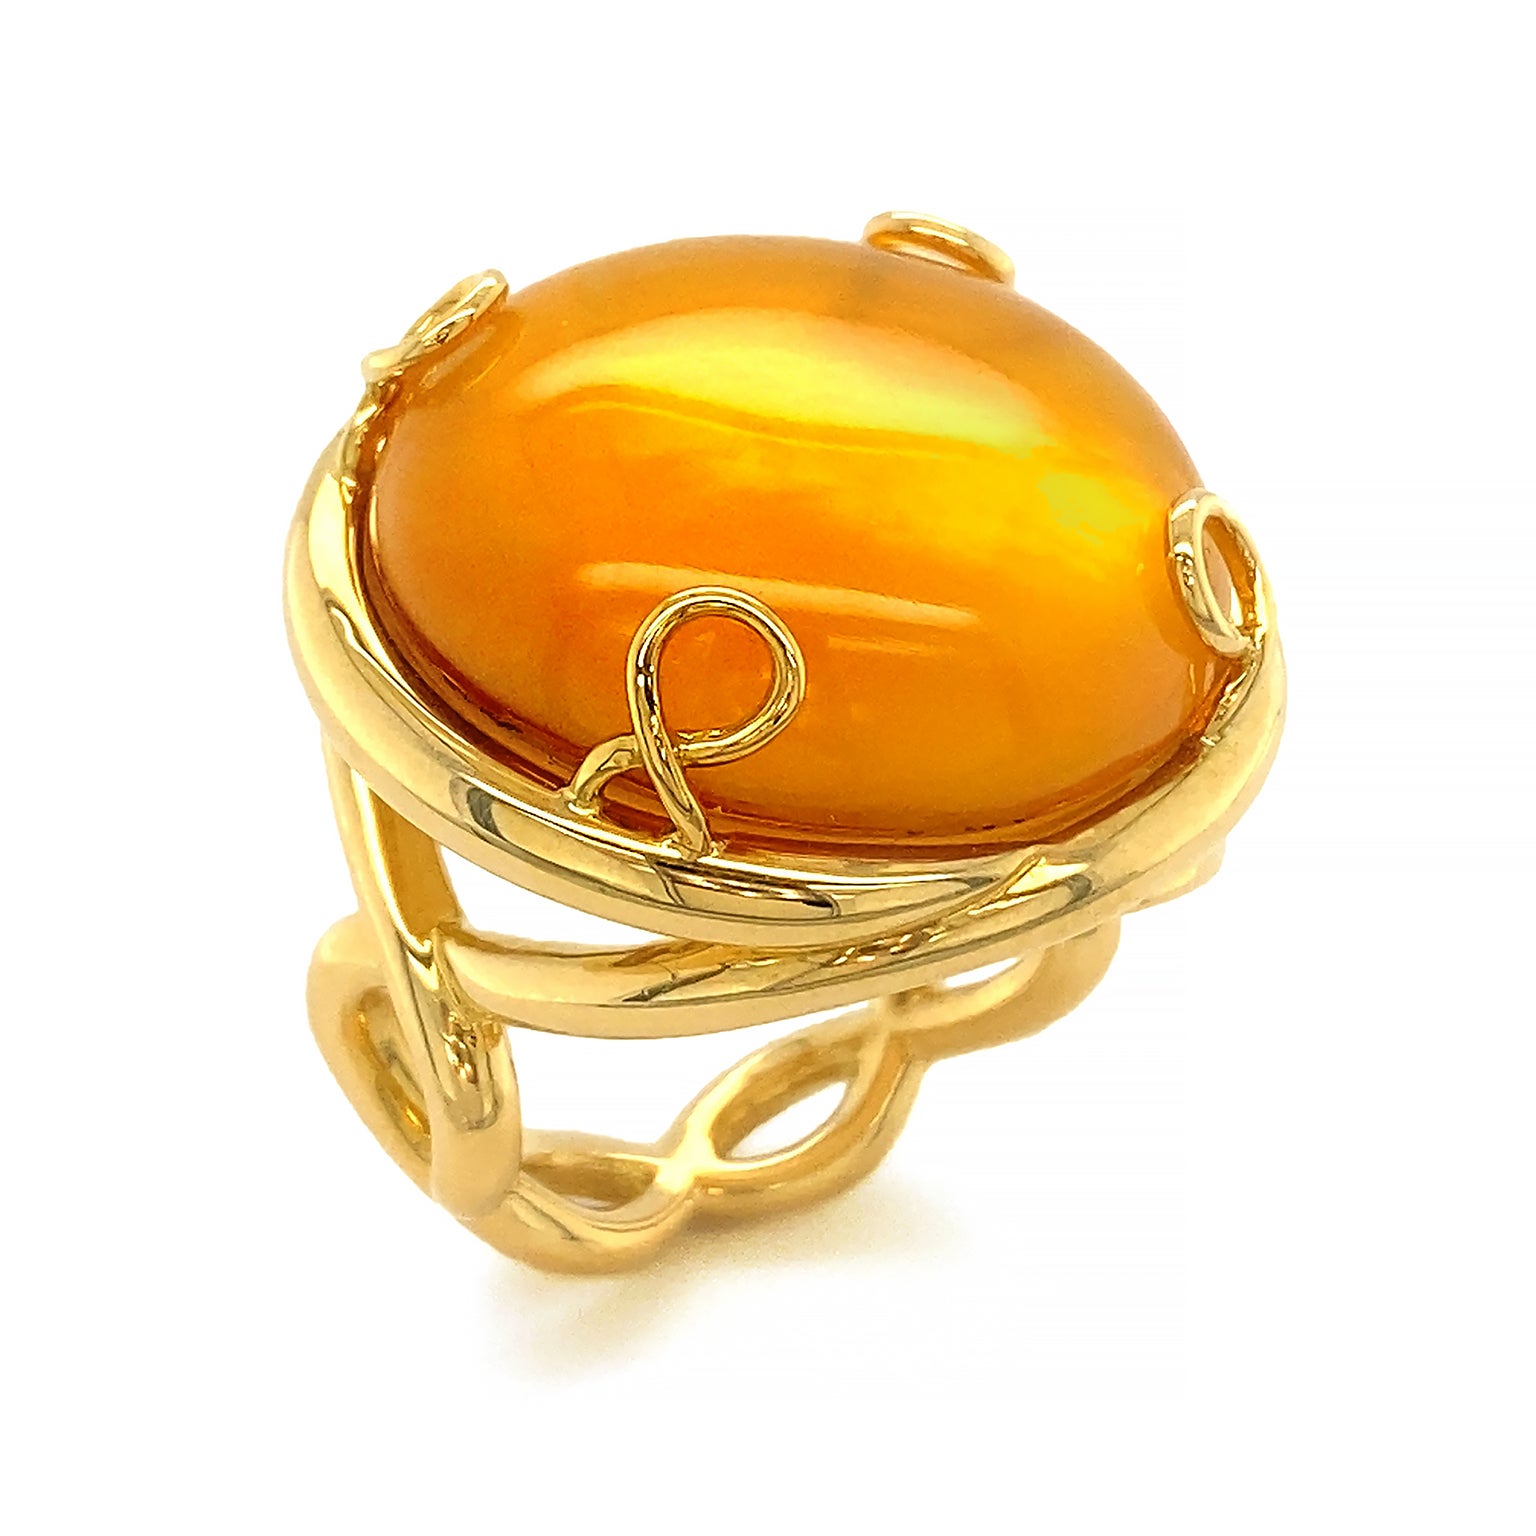 Light expresses several ways in this ring. The body is 18k yellow gold with twisted prongs and a criss-cross helix shank. A strong polish makes the precious metal mirror bright. The upper stone is a bright orange citrine carved into a 22mm round